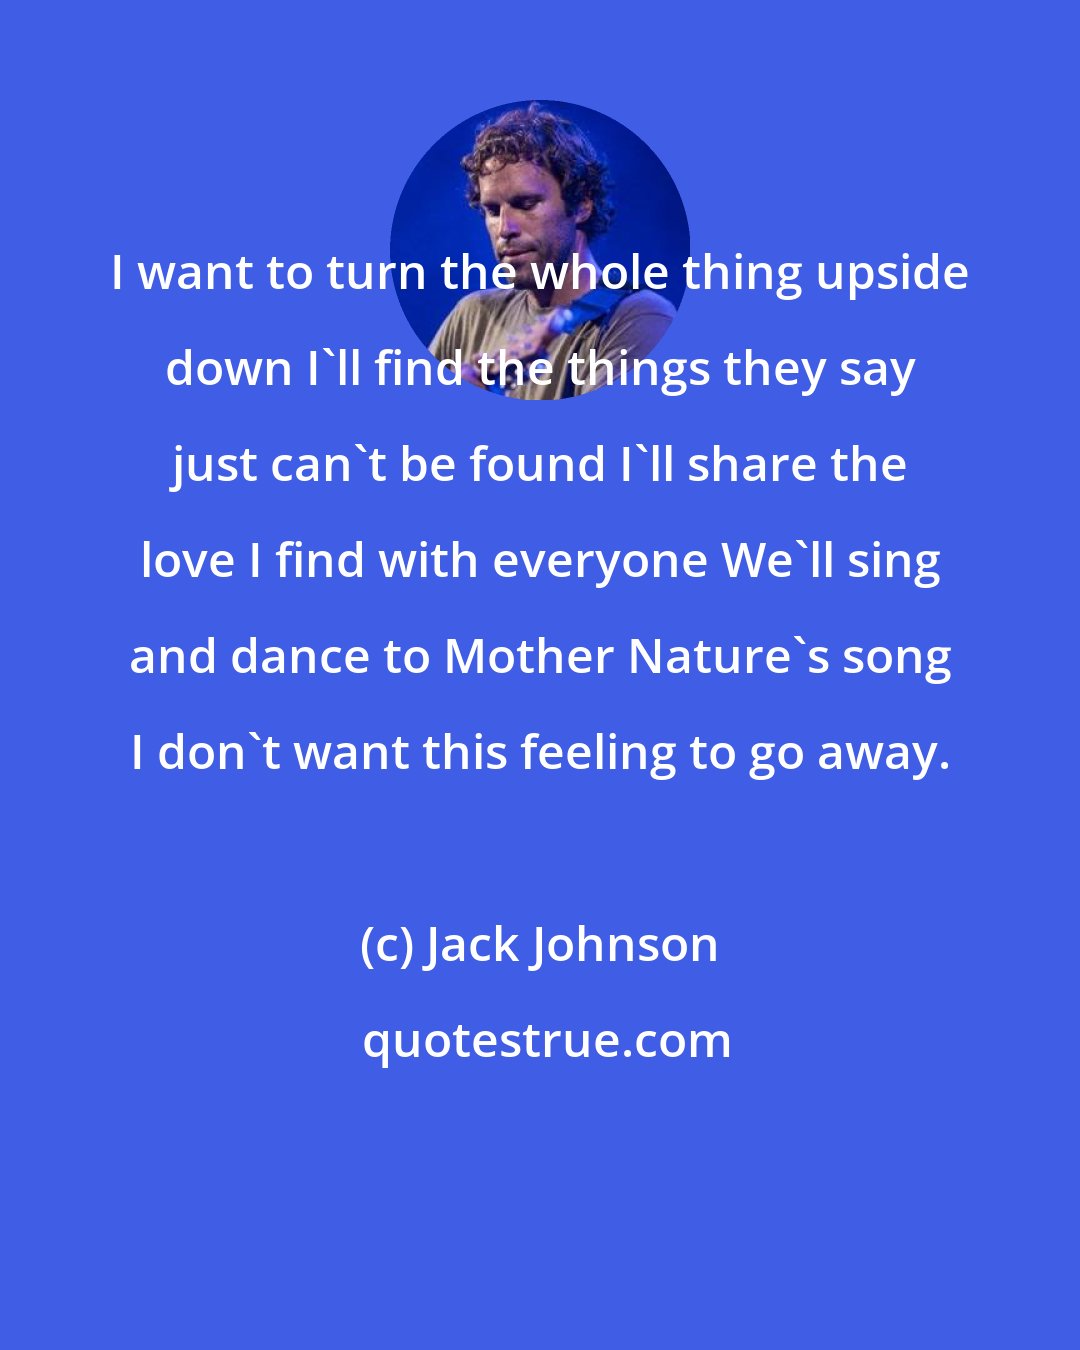 Jack Johnson: I want to turn the whole thing upside down I'll find the things they say just can't be found I'll share the love I find with everyone We'll sing and dance to Mother Nature's song I don't want this feeling to go away.